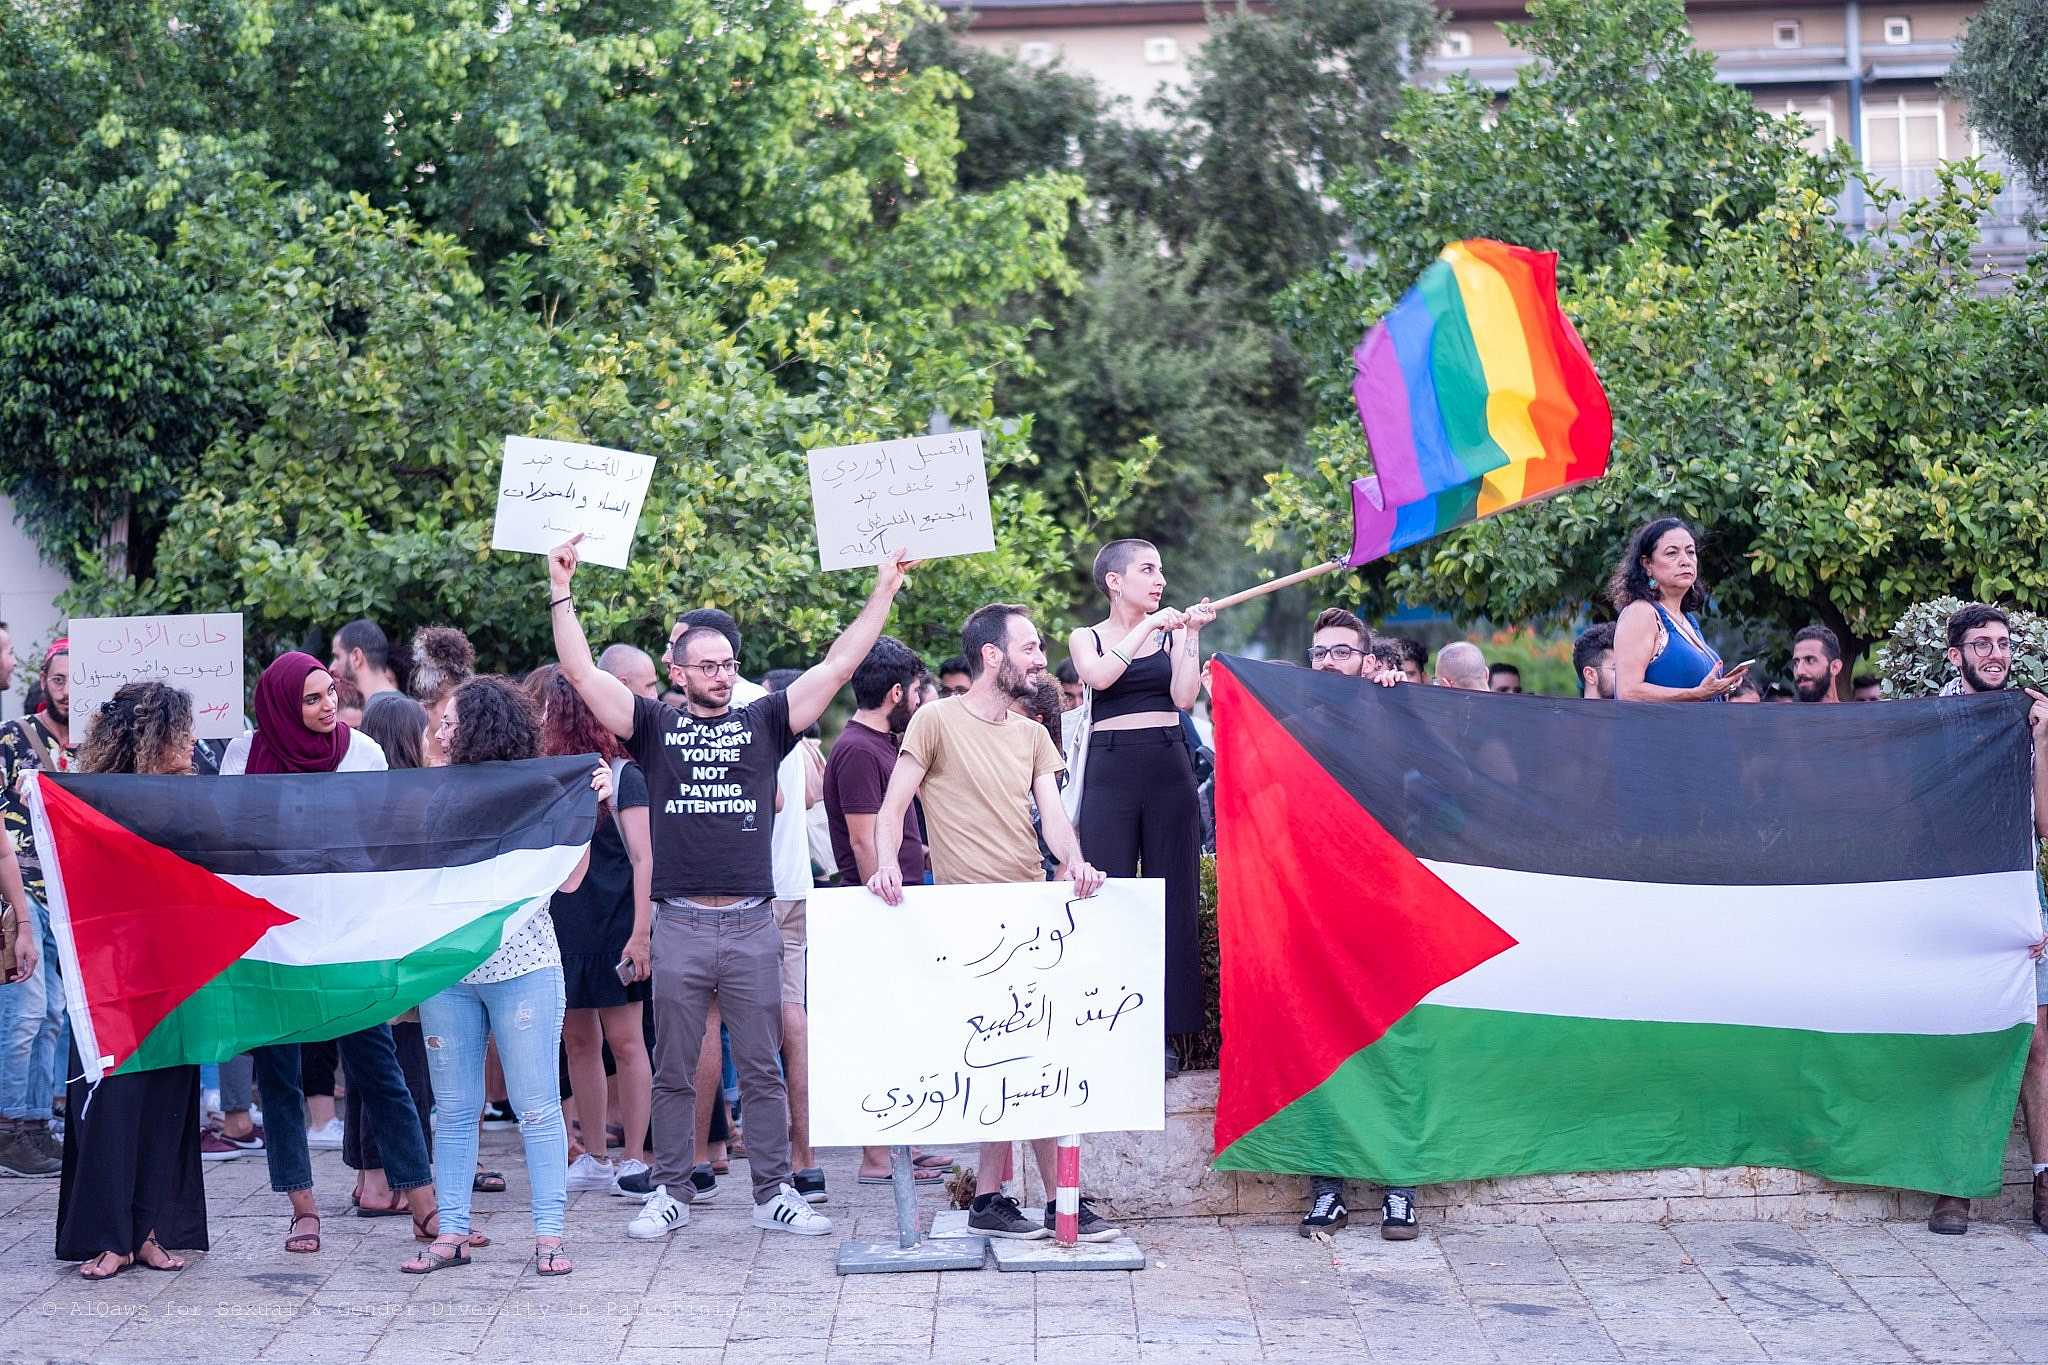 Palestinian Voices Condemn Violence Against LGBTQ people